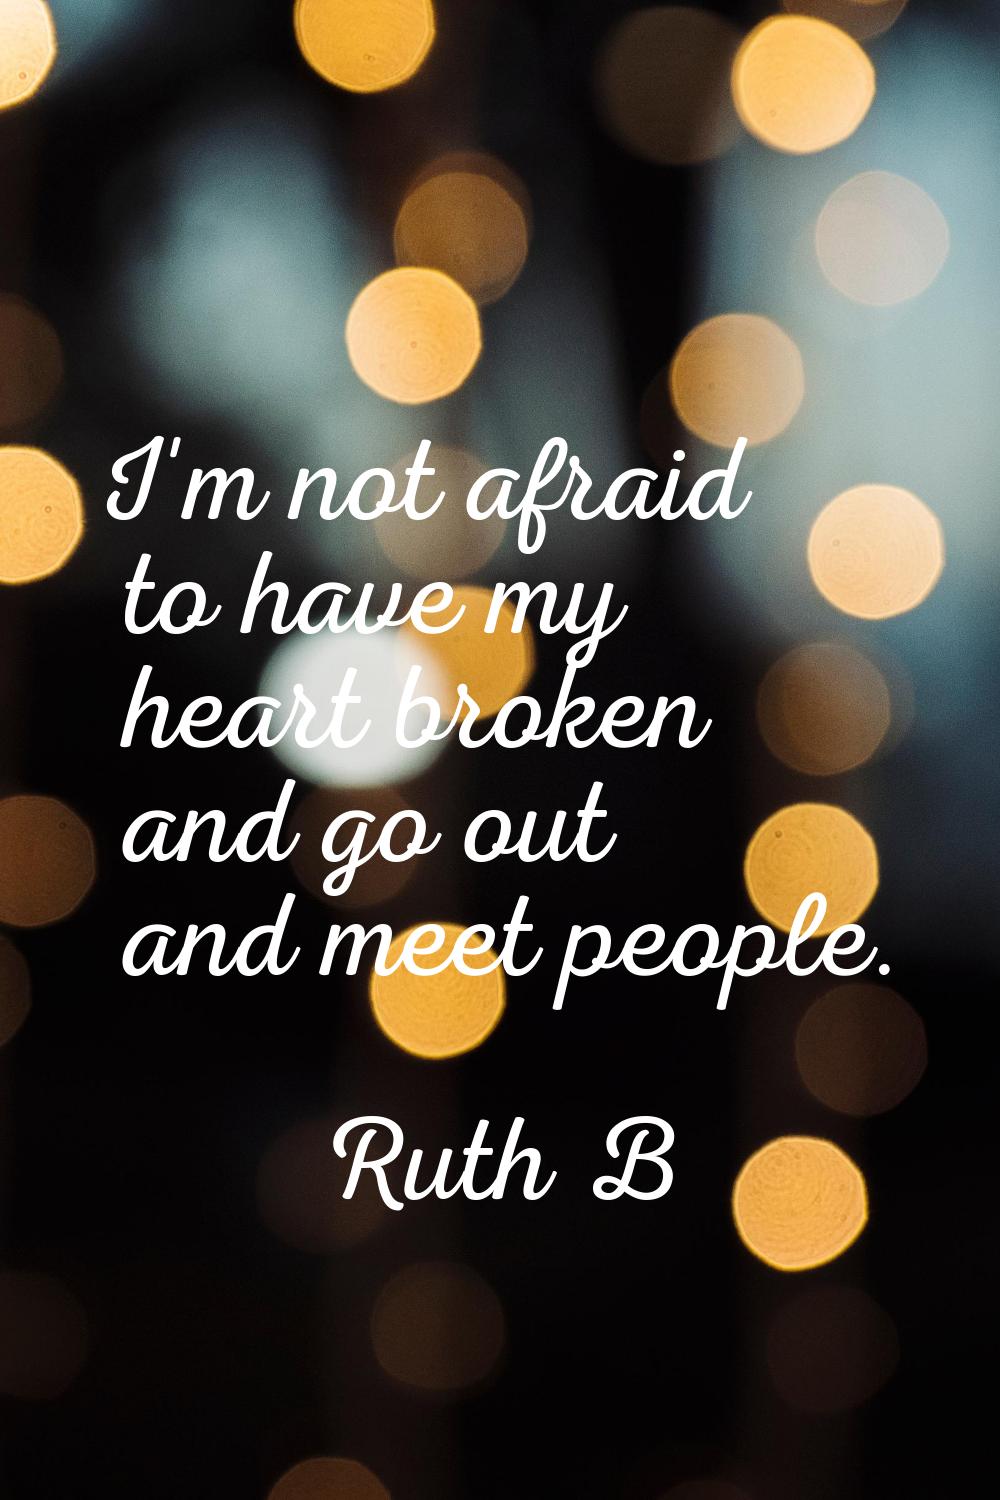 I'm not afraid to have my heart broken and go out and meet people.